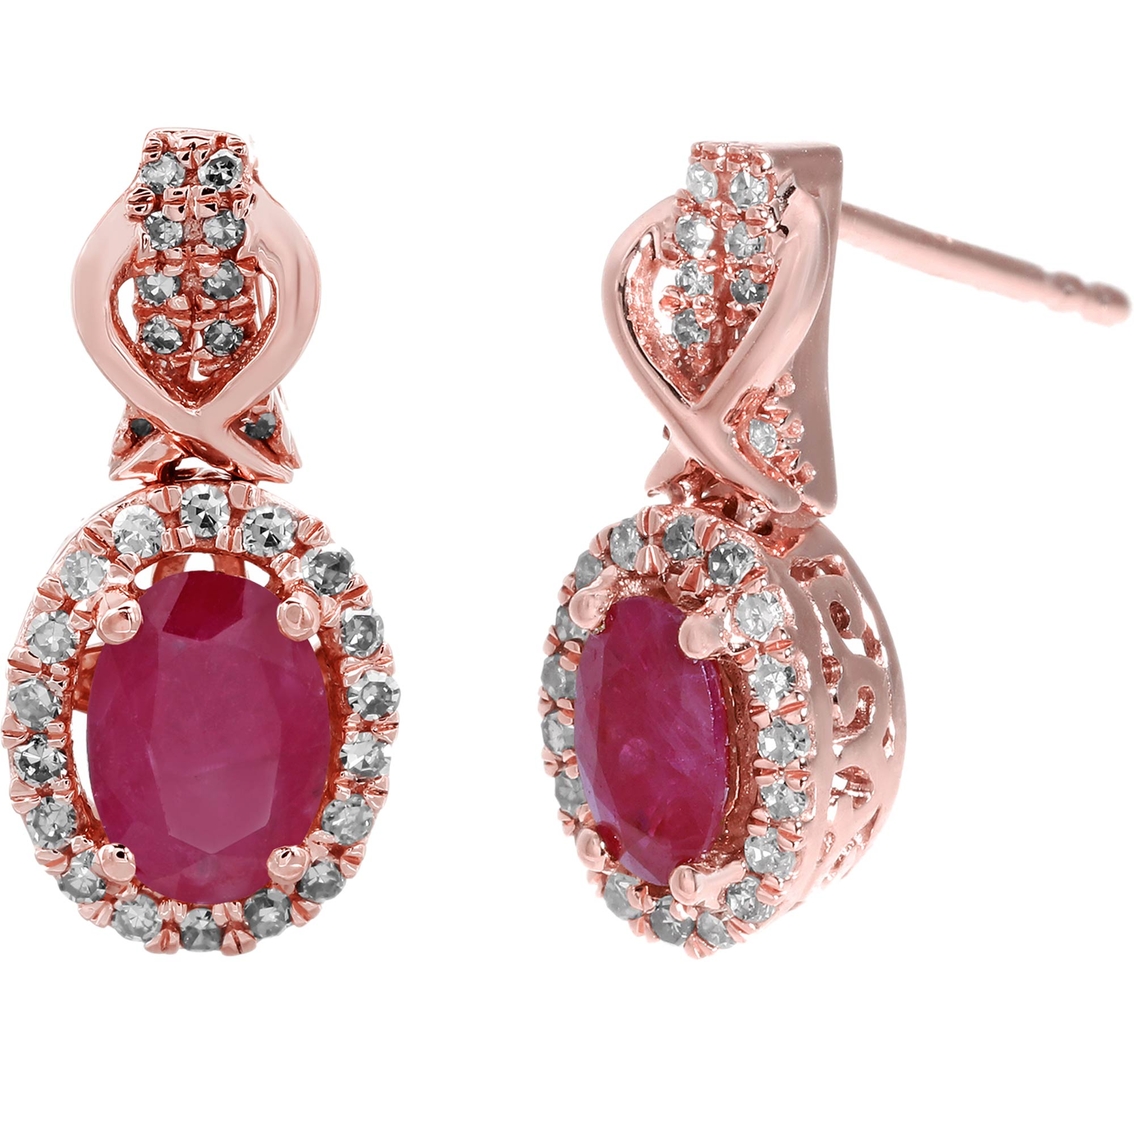 Details about   Ruby Gemstone Party Jewelry 10k Rose Gold Earrings